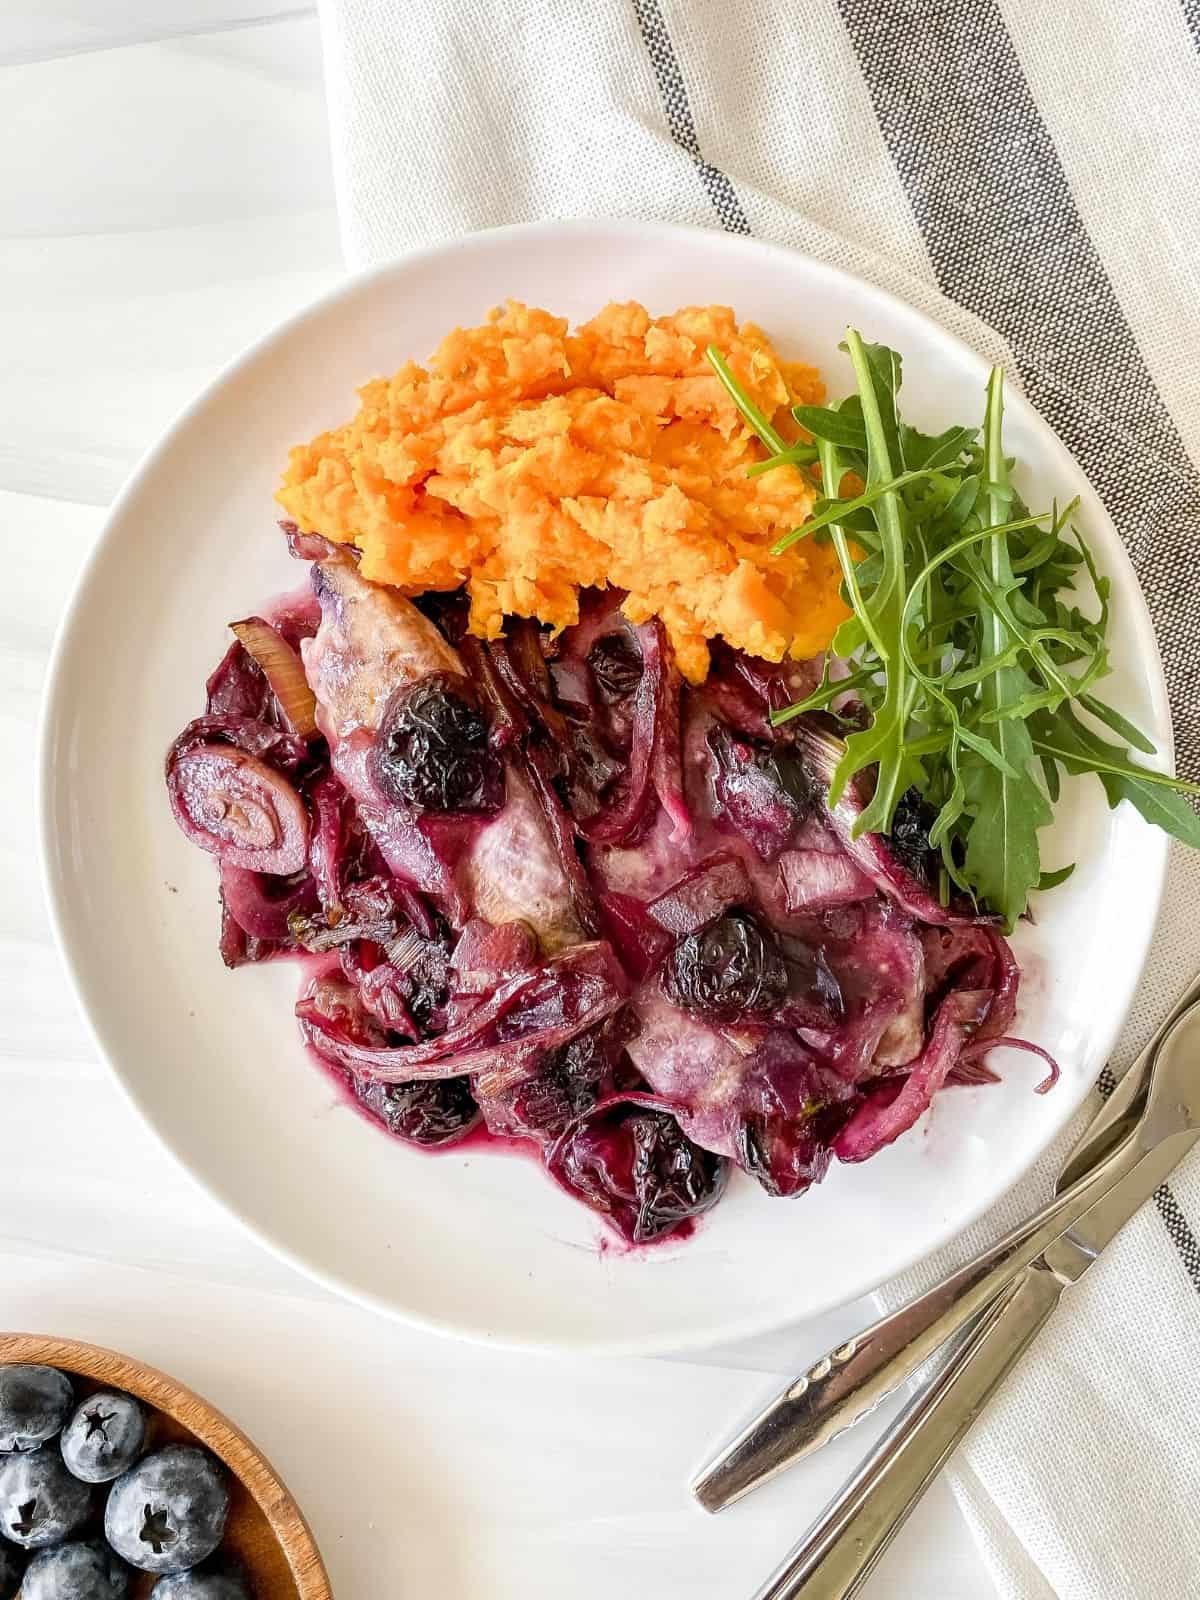 blueberry chicken, sweet potato mash and arugala on a white plate next to a brown plate of blueberries.